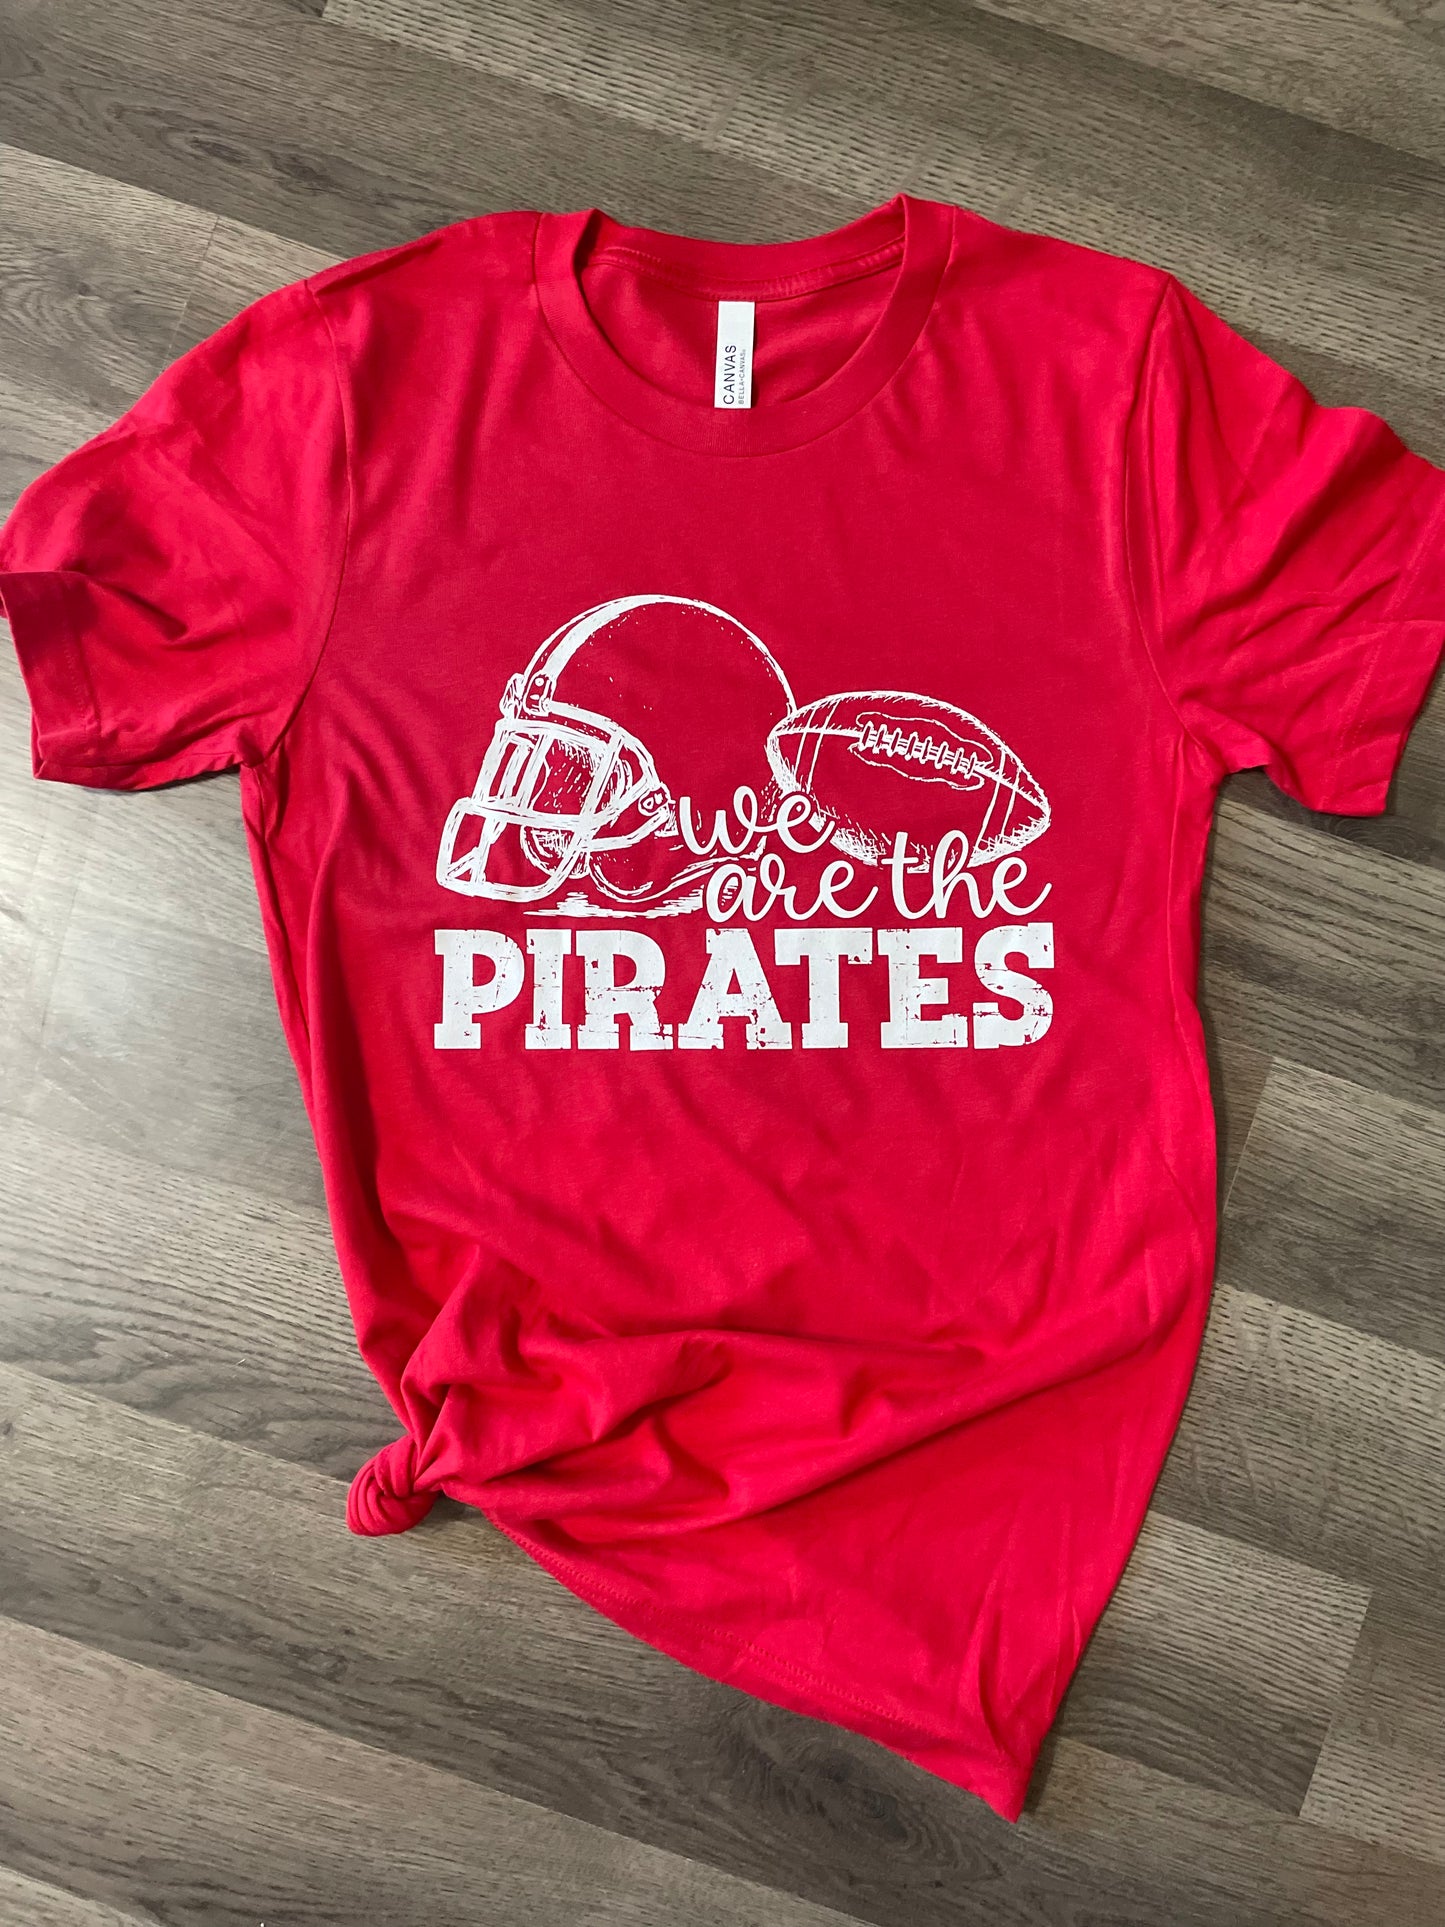 We are the Pirates short sleeve t-shirt